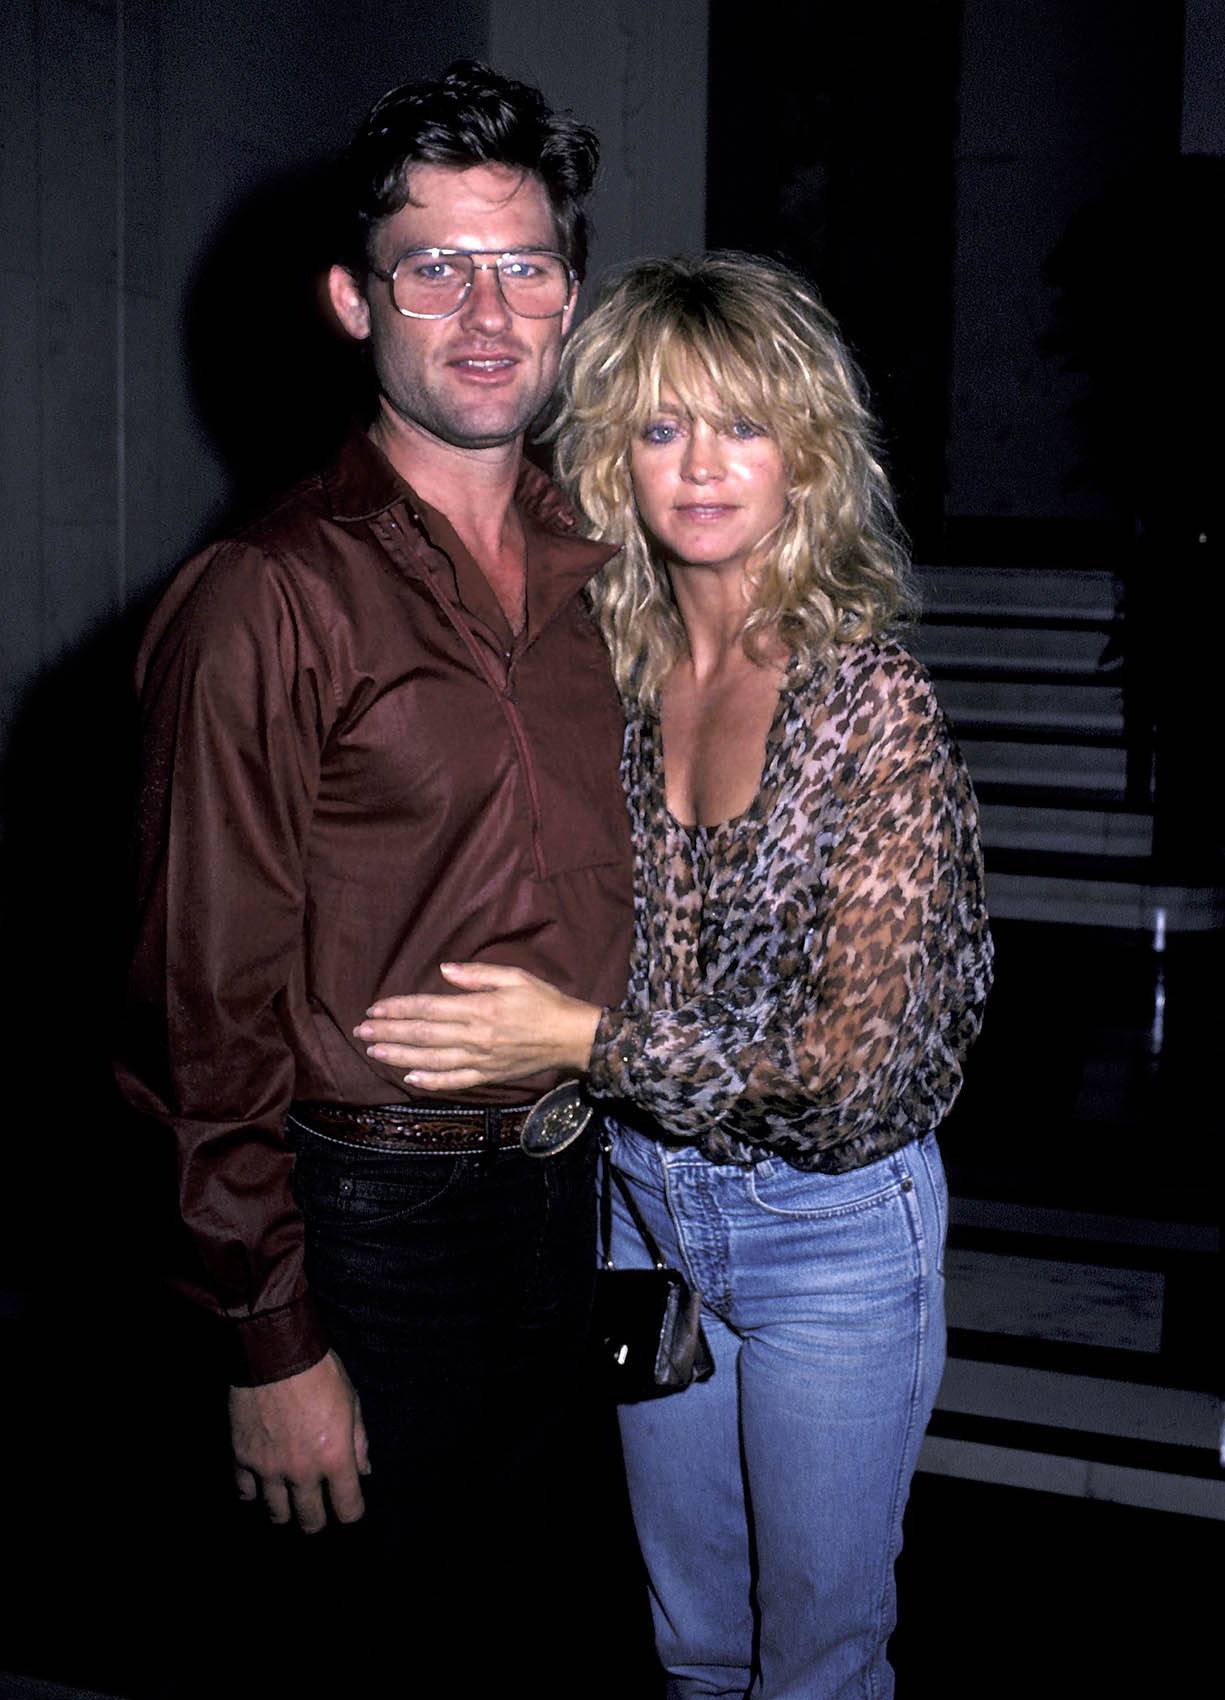 Kurt Russell i Goldie Hawn (Fot. Ron Galella/Ron Galella Collection via Getty Images)